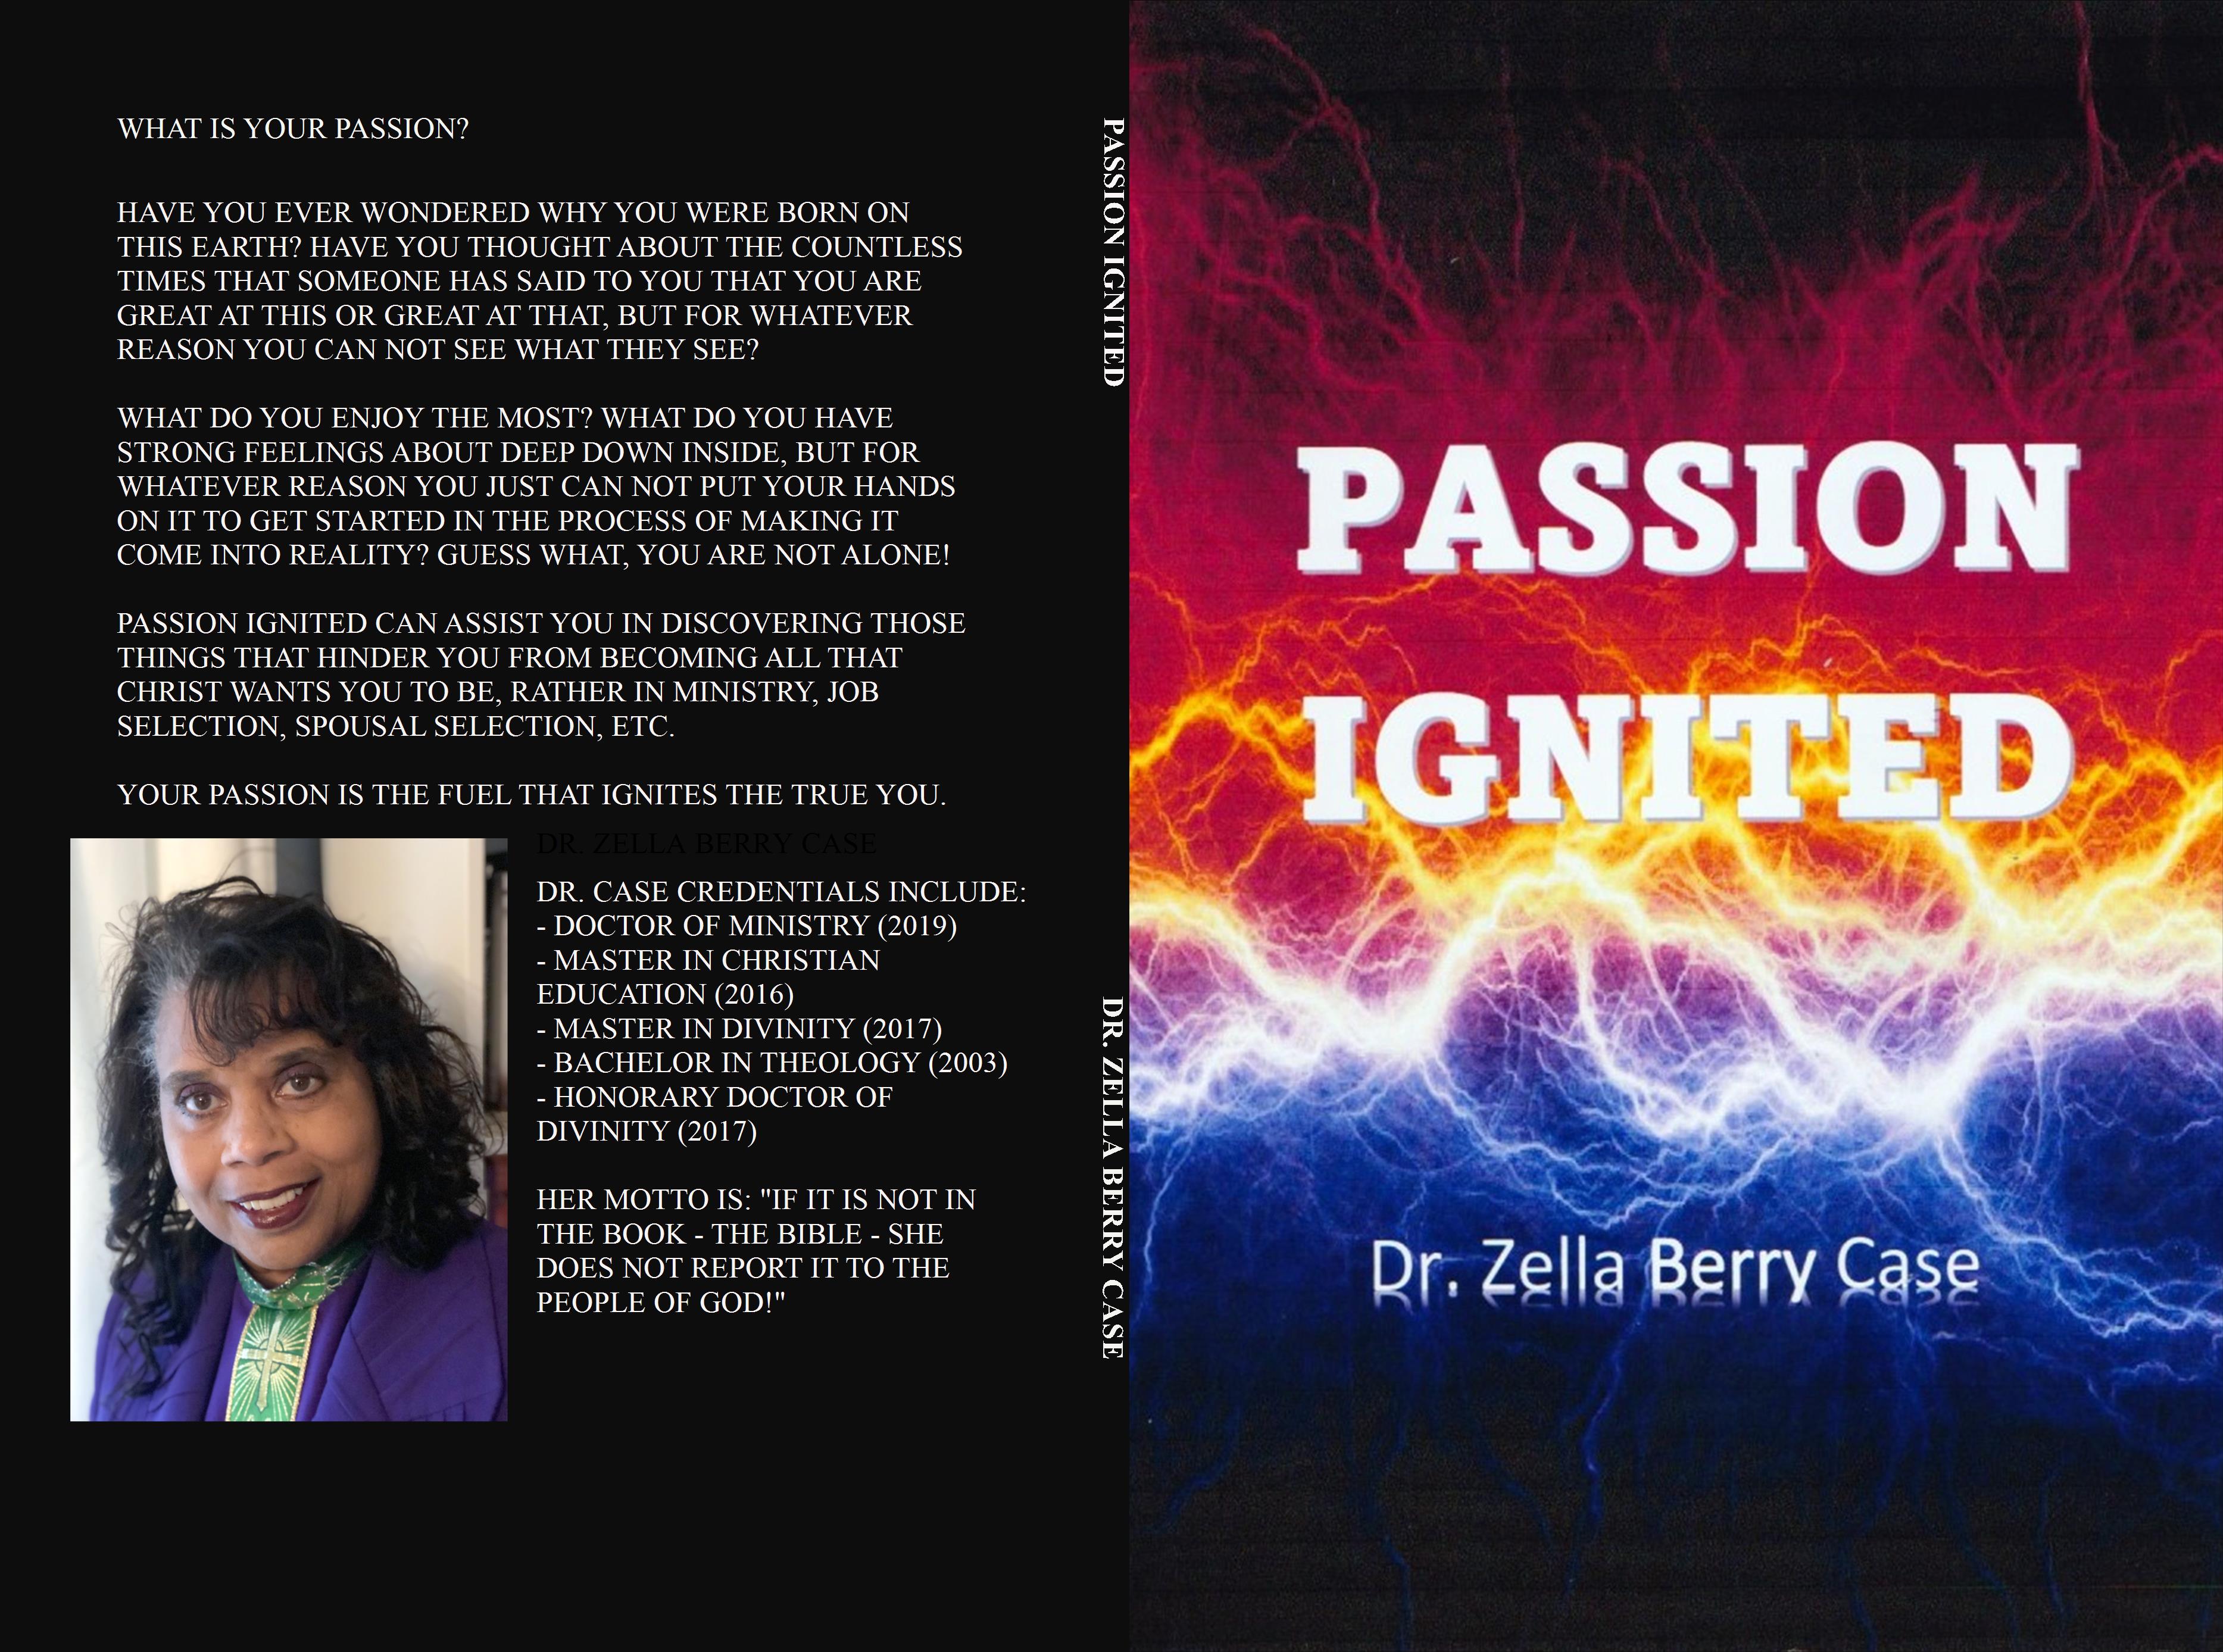 Passion Ignited cover image